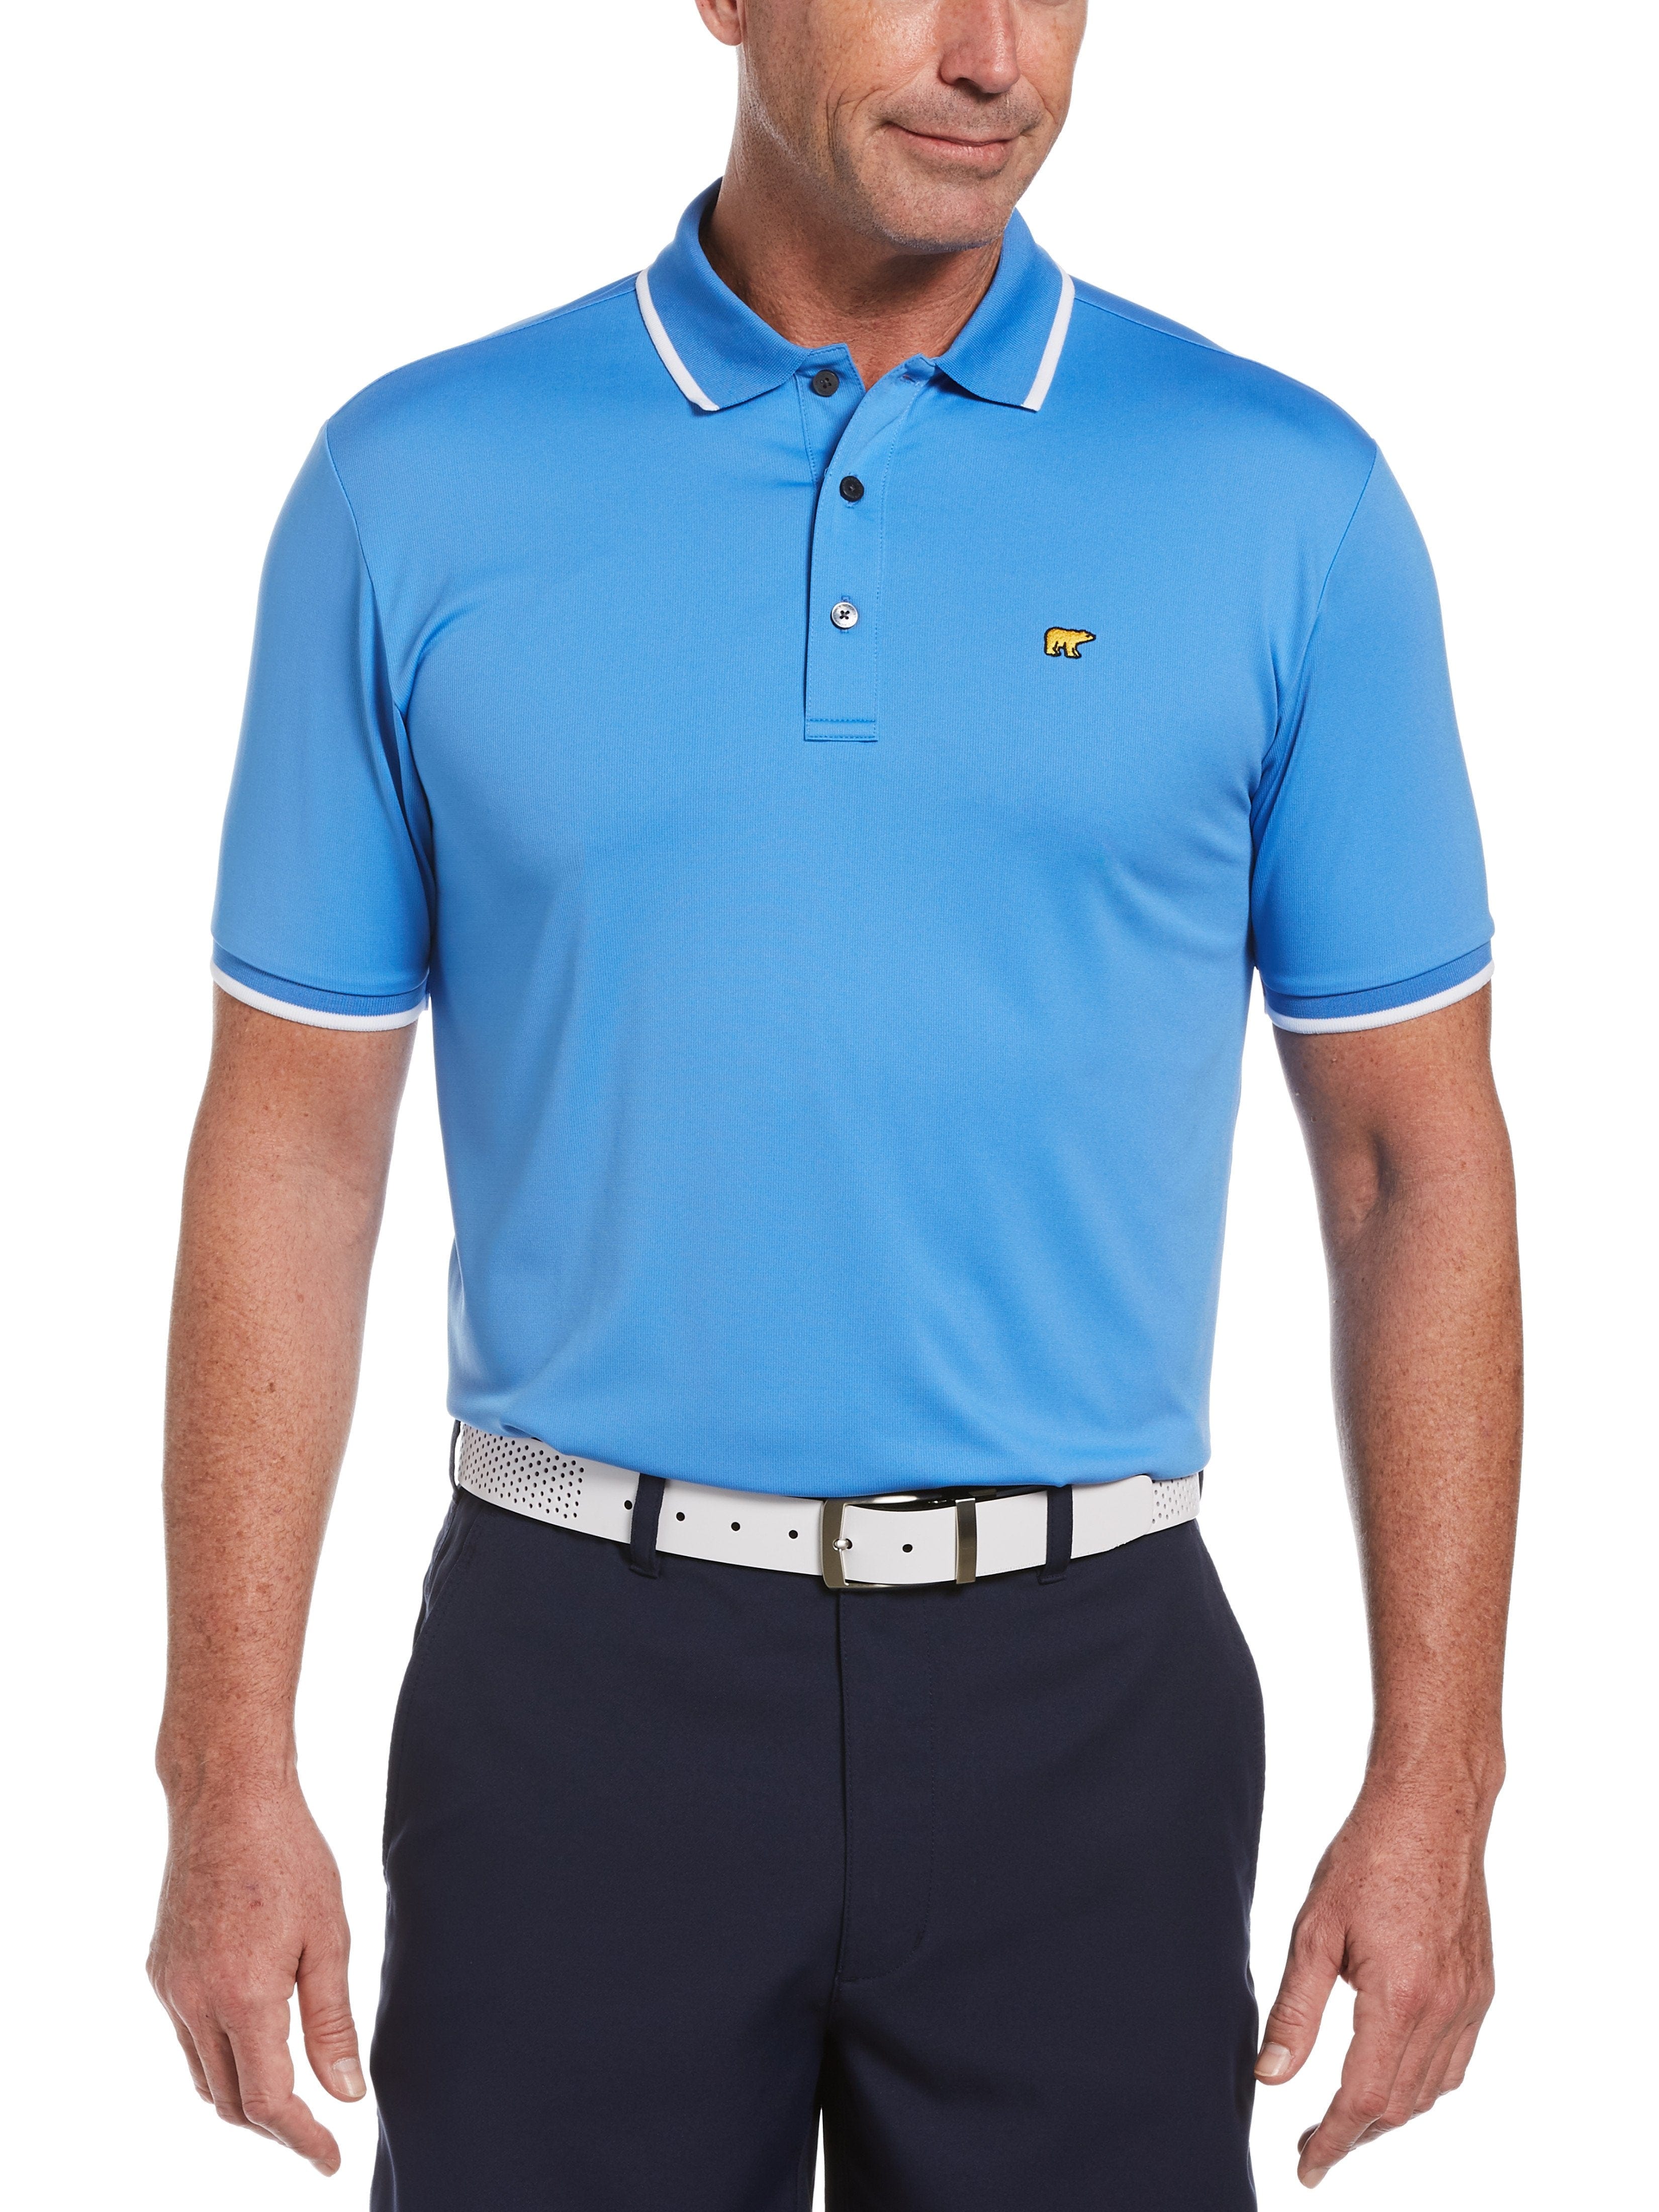 Jack Nicklaus Mens Solid Golf Polo Shirt w/ Cuff Tipping, Size Large, Blue Perennial, 100% Polyester | Golf Apparel Shop